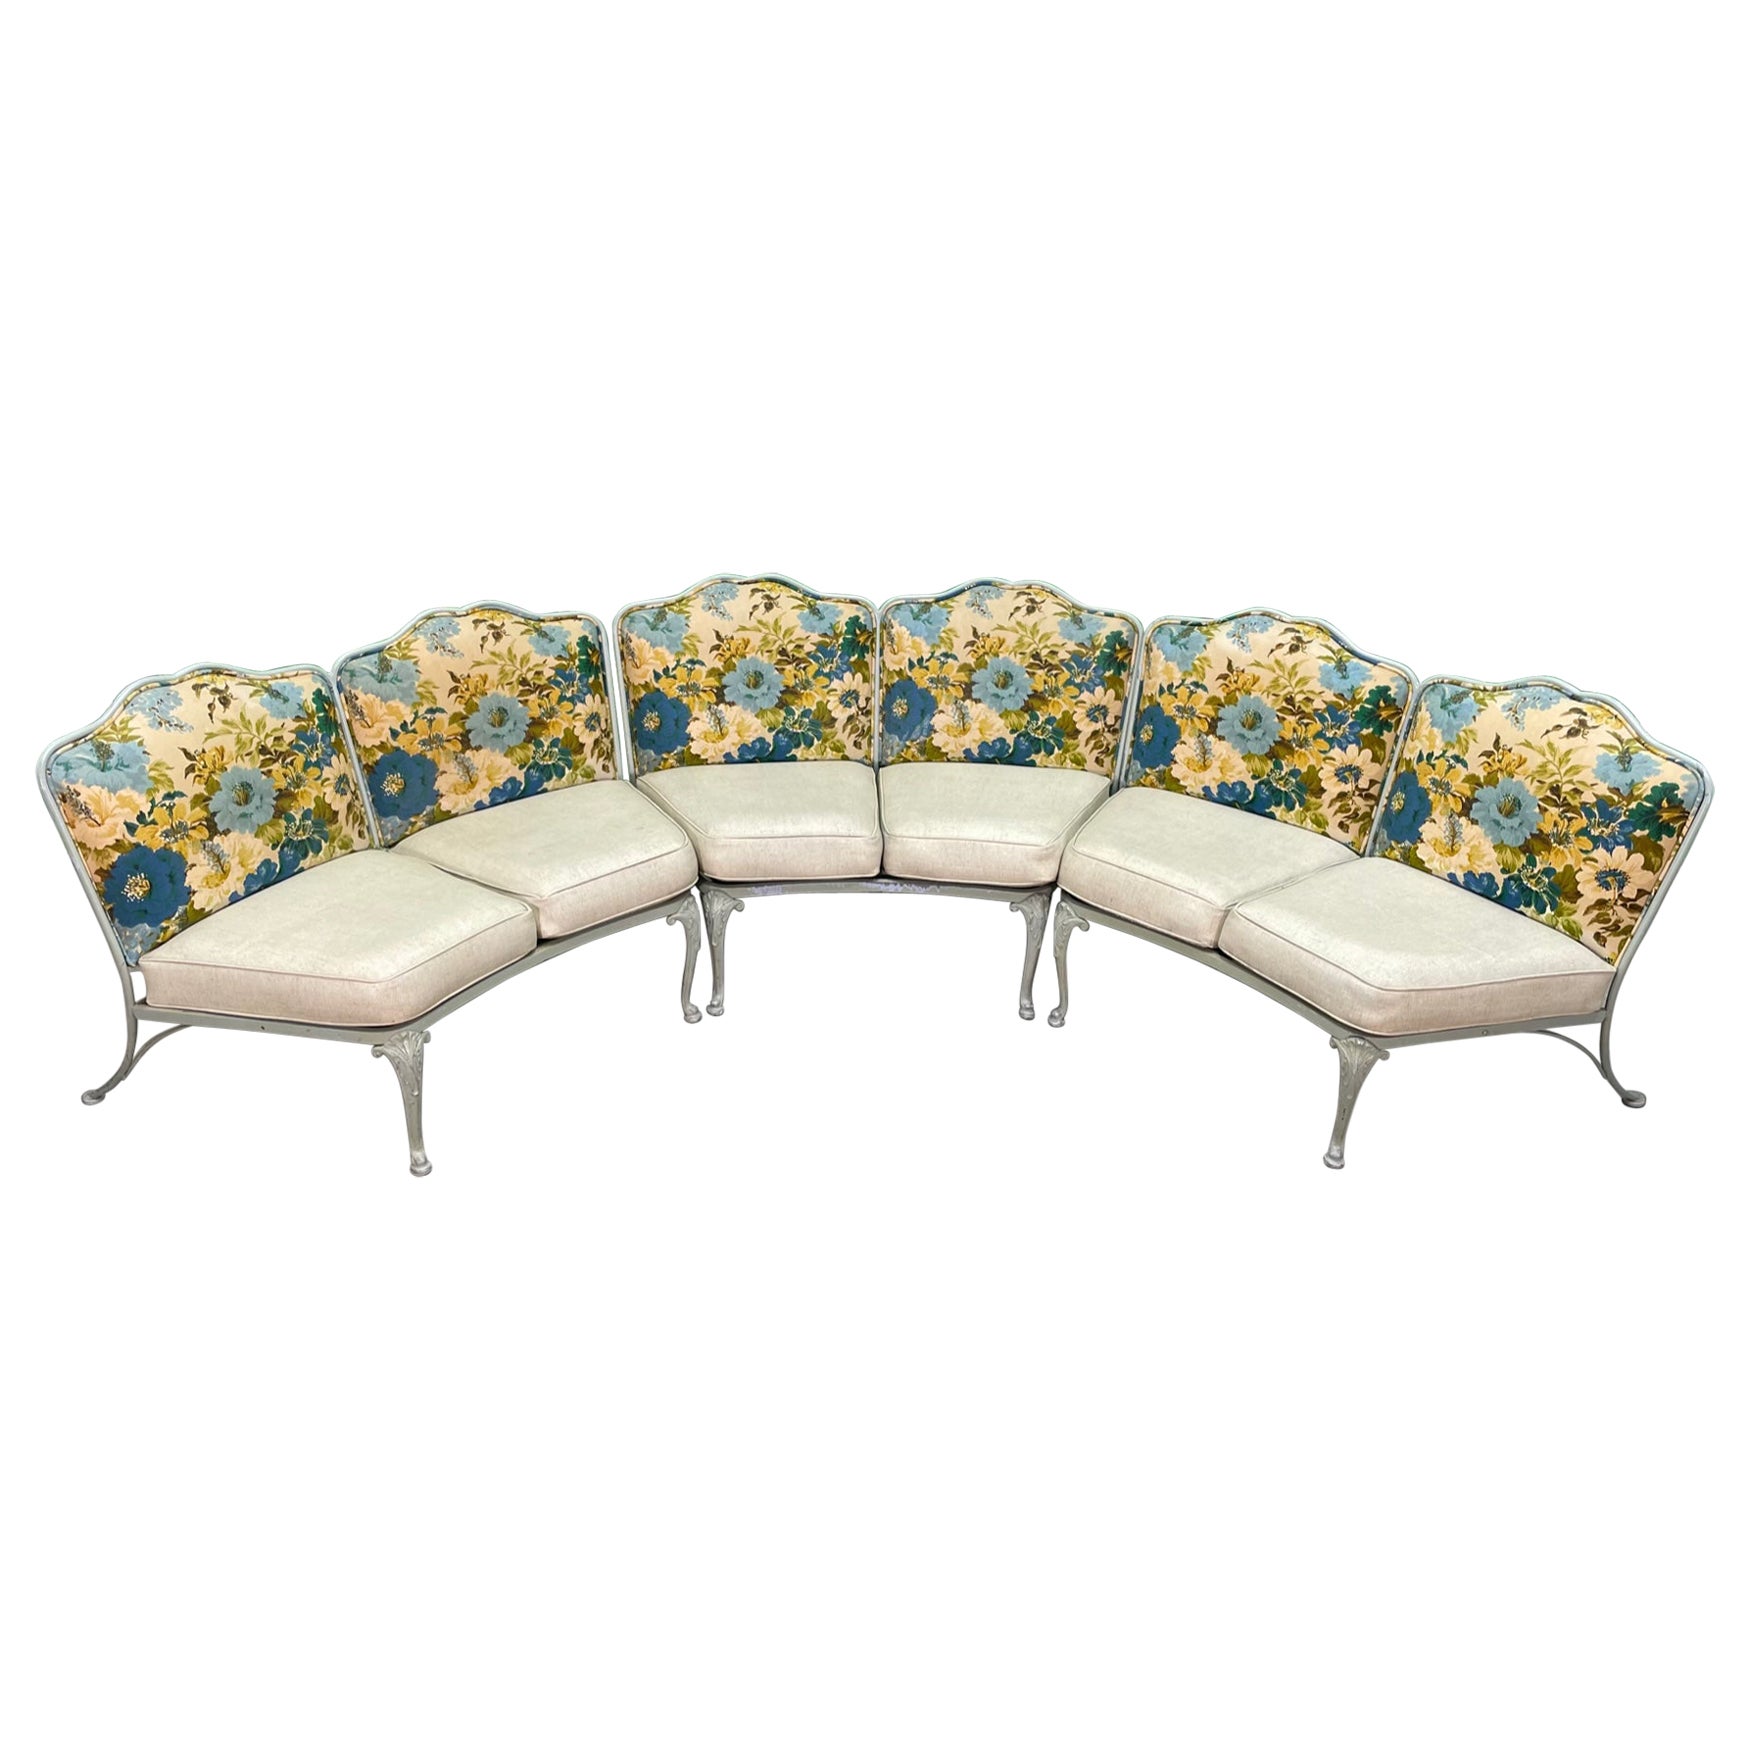 Russell Woodard Signed Wrought Iron Curved Sectional Patio Sofa